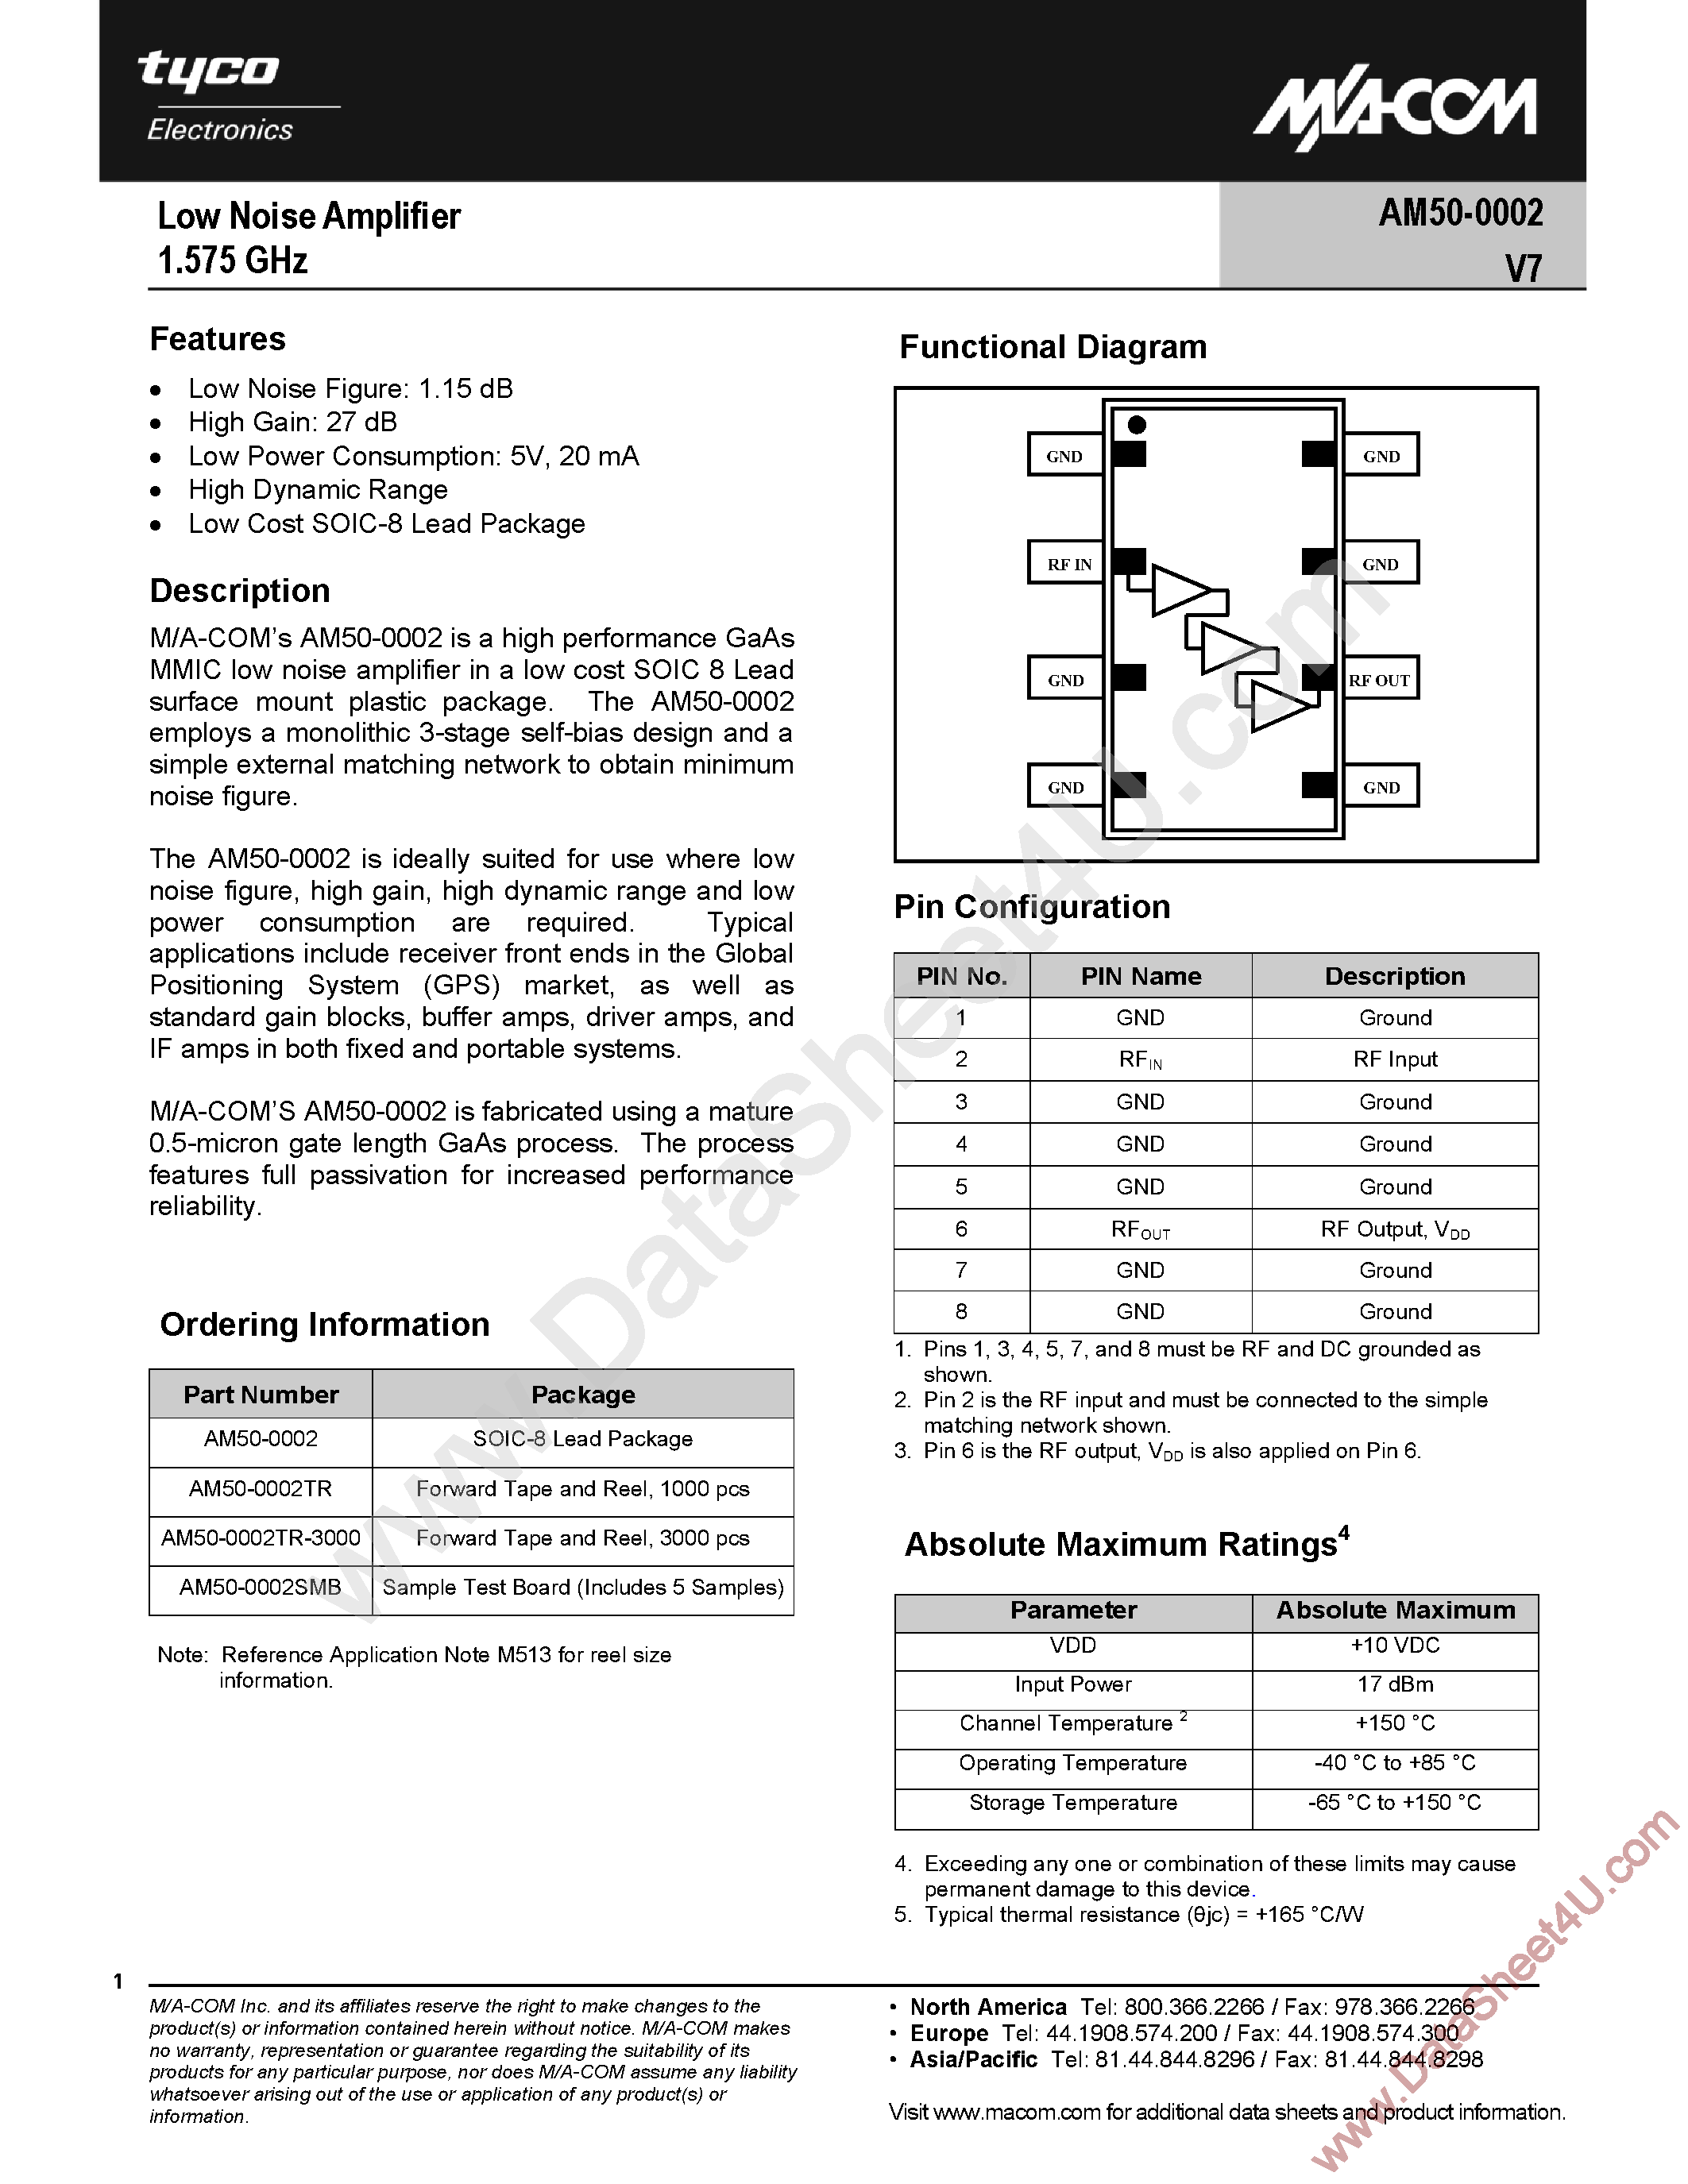 Datasheet AM50-0002V7 - Low Noise Amplifier page 1